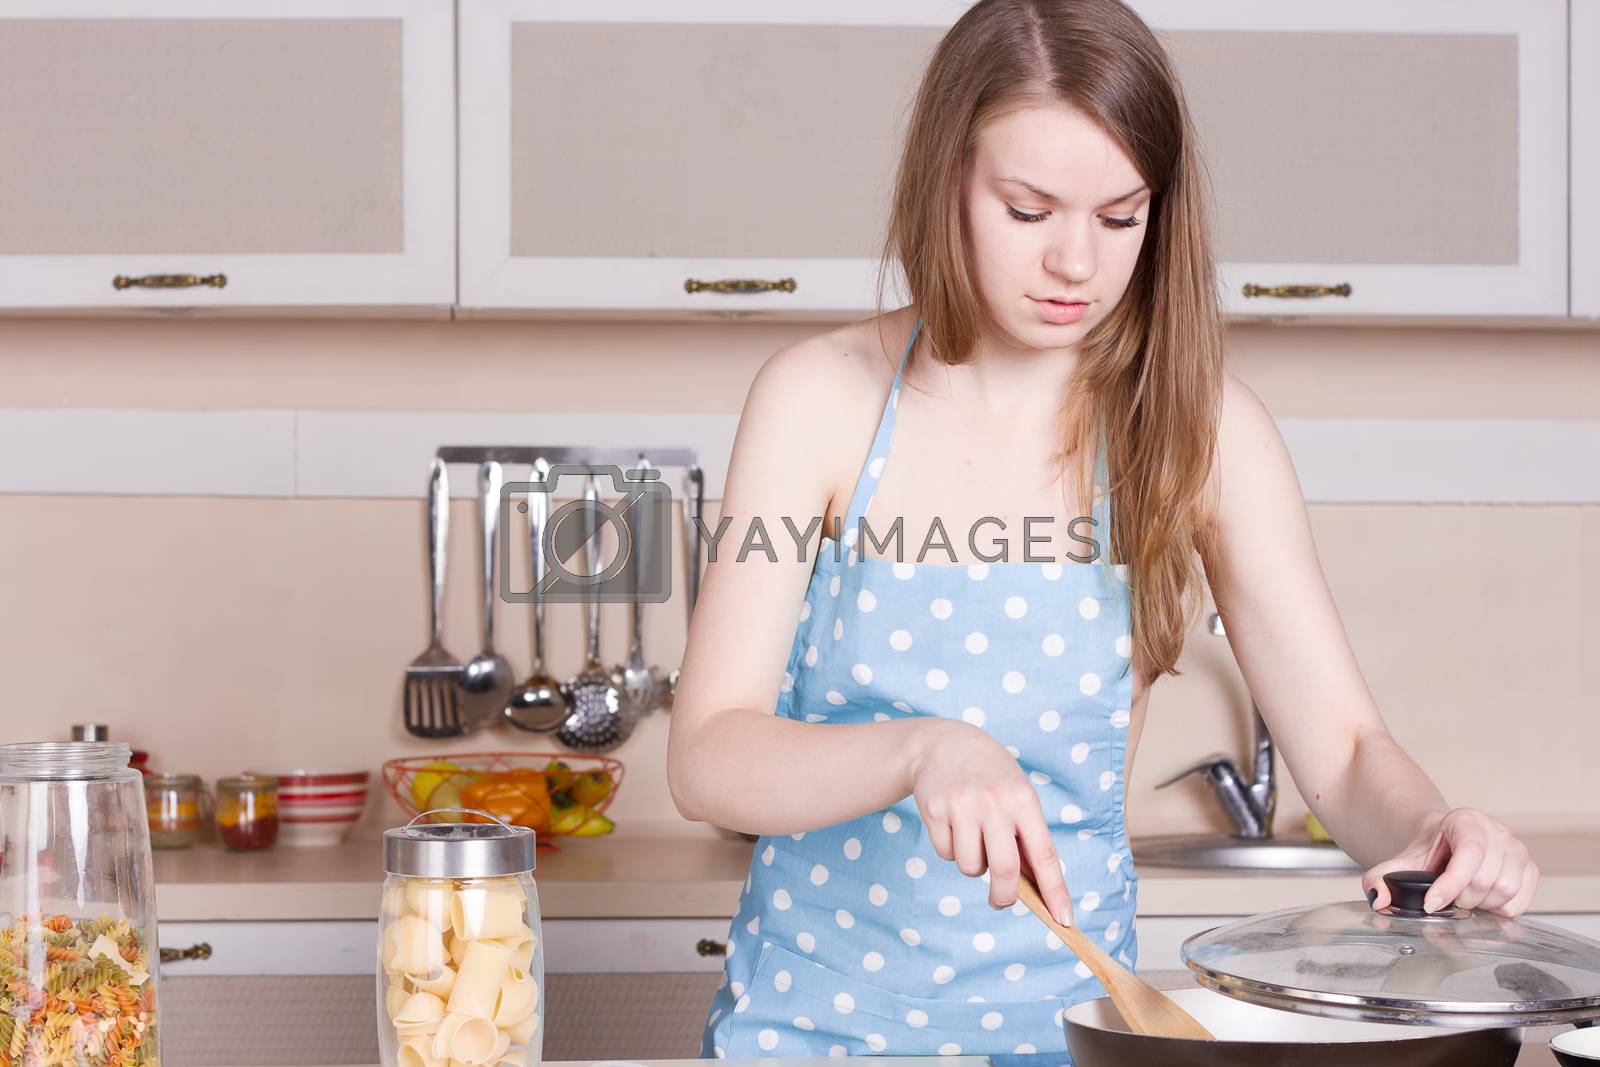 Best of Naked girl in kitchen